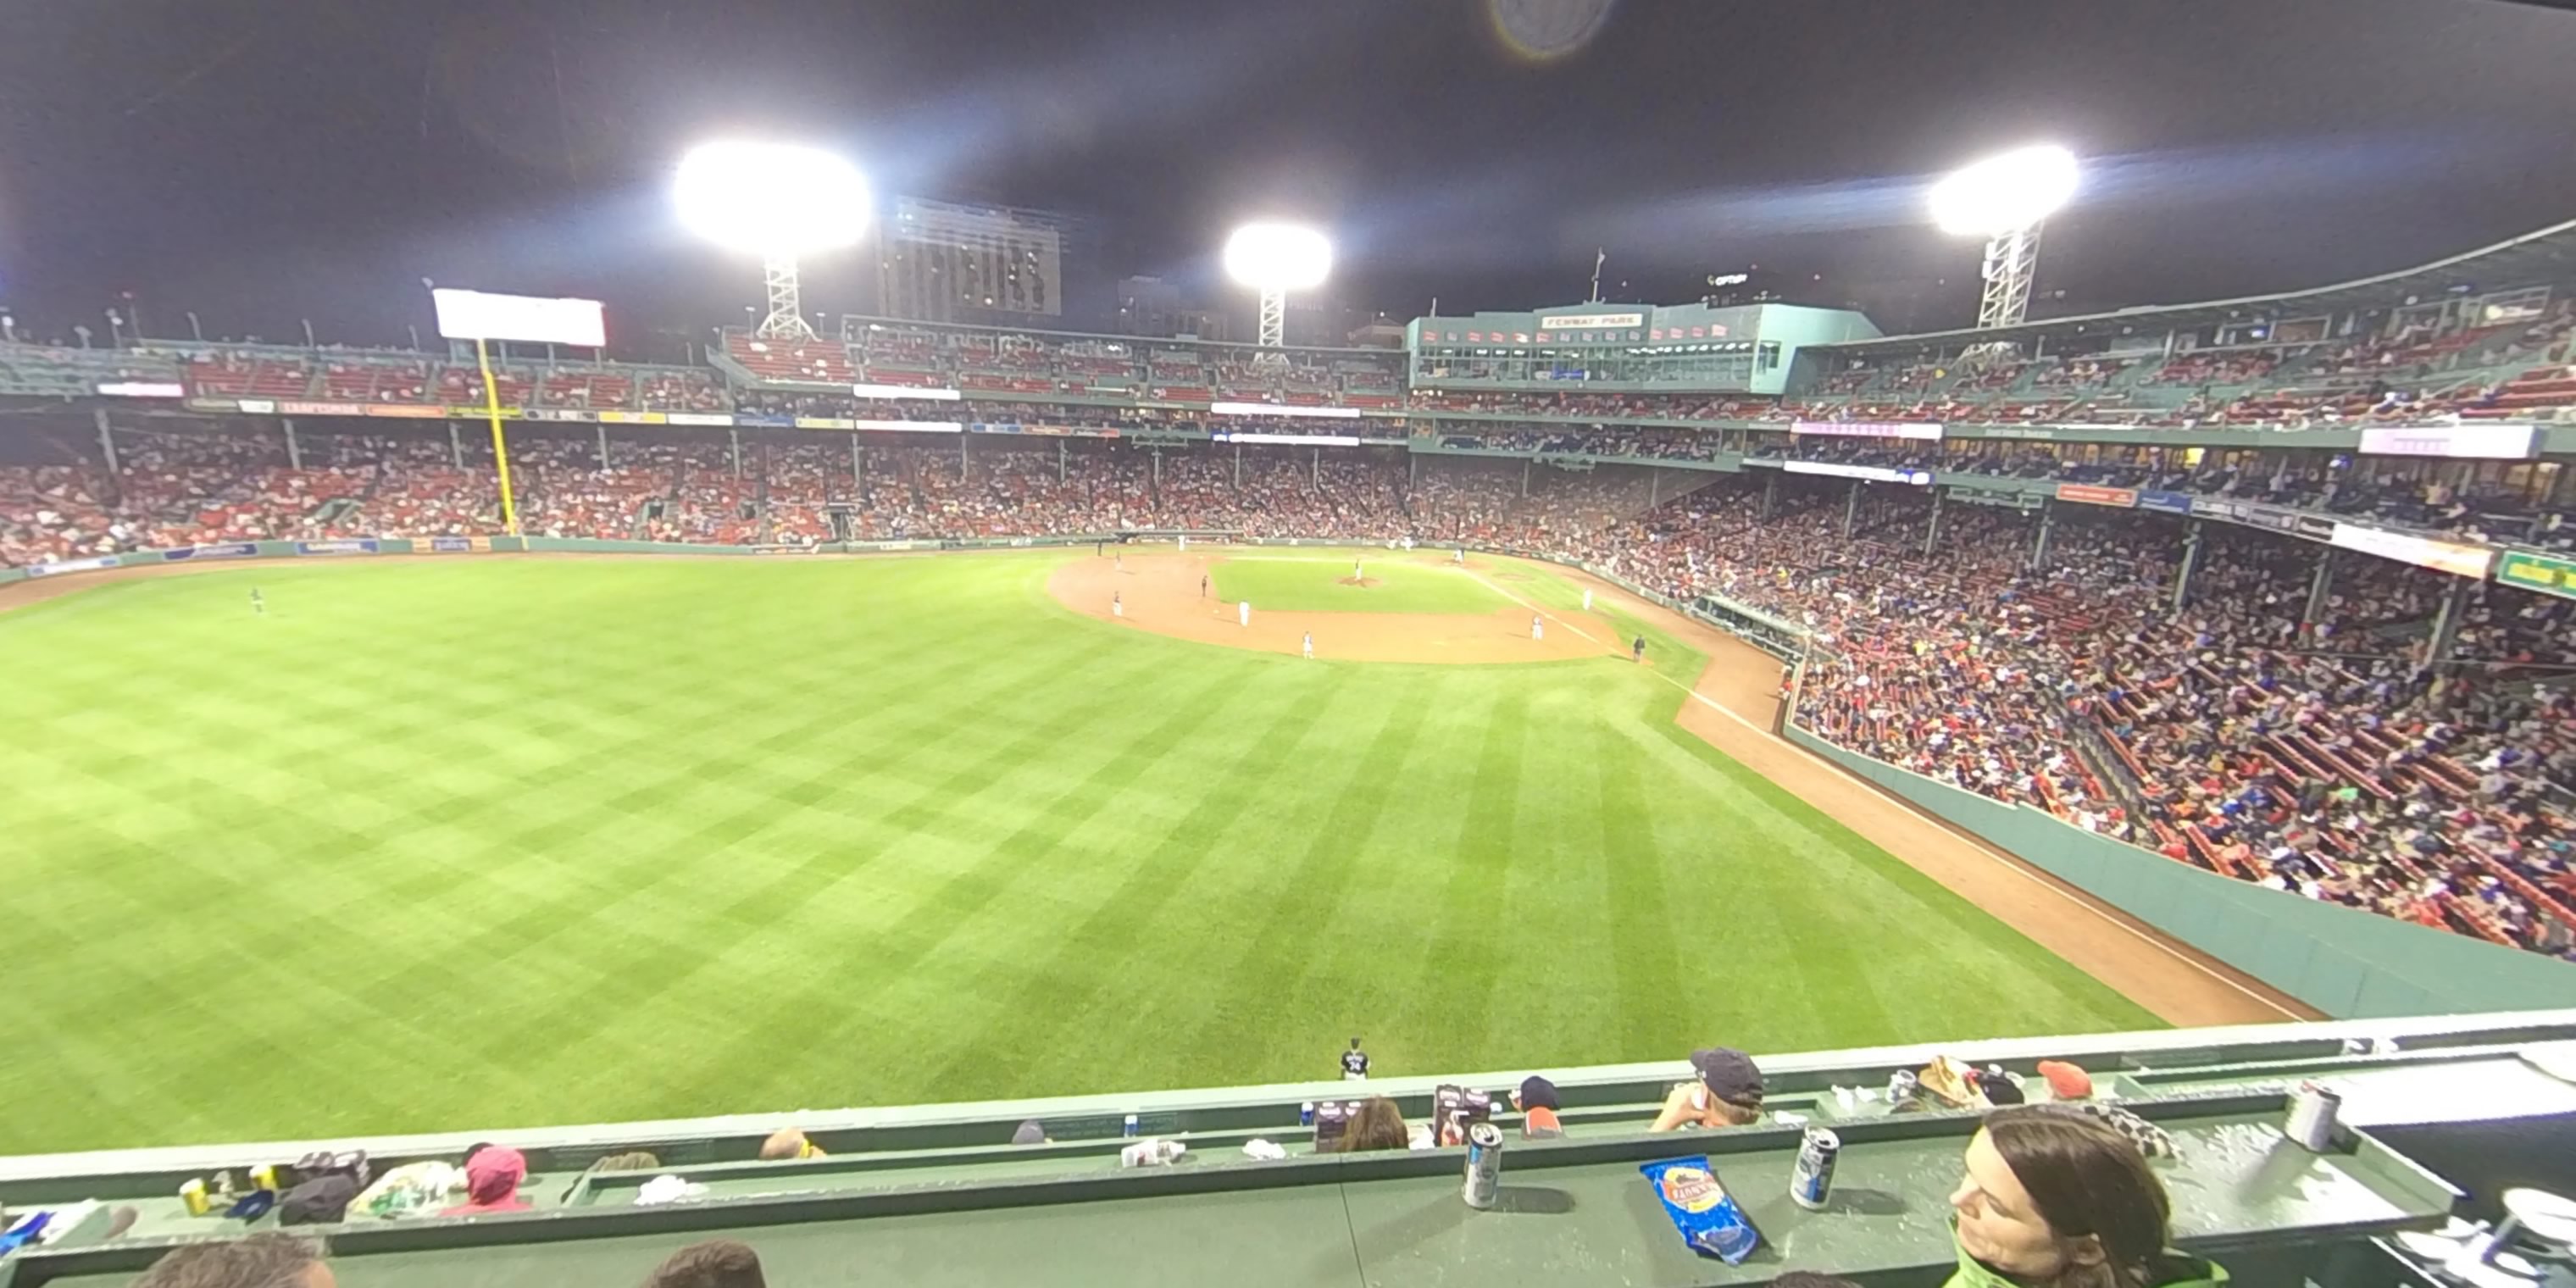 Watch: Ball gets lodged in light in Fenway Park's Green Monster